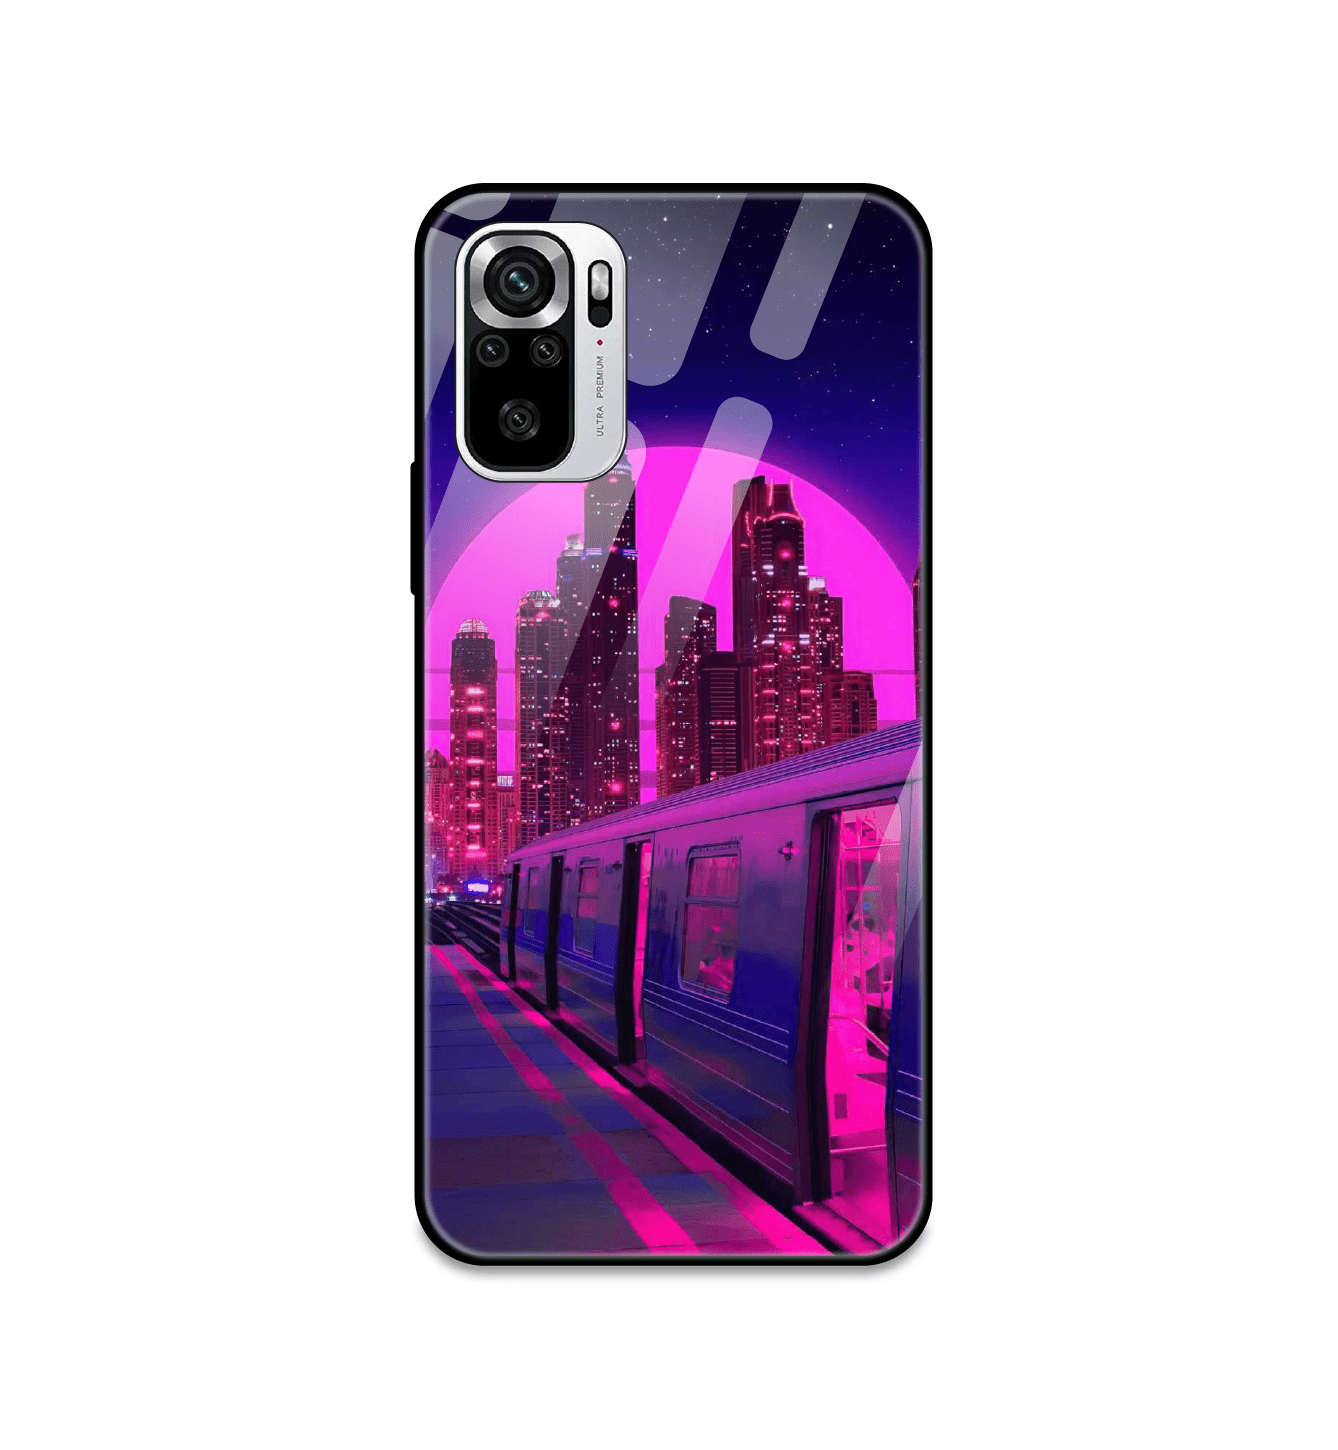 Neon City Synthwave - Glass Cases For Redmi Models